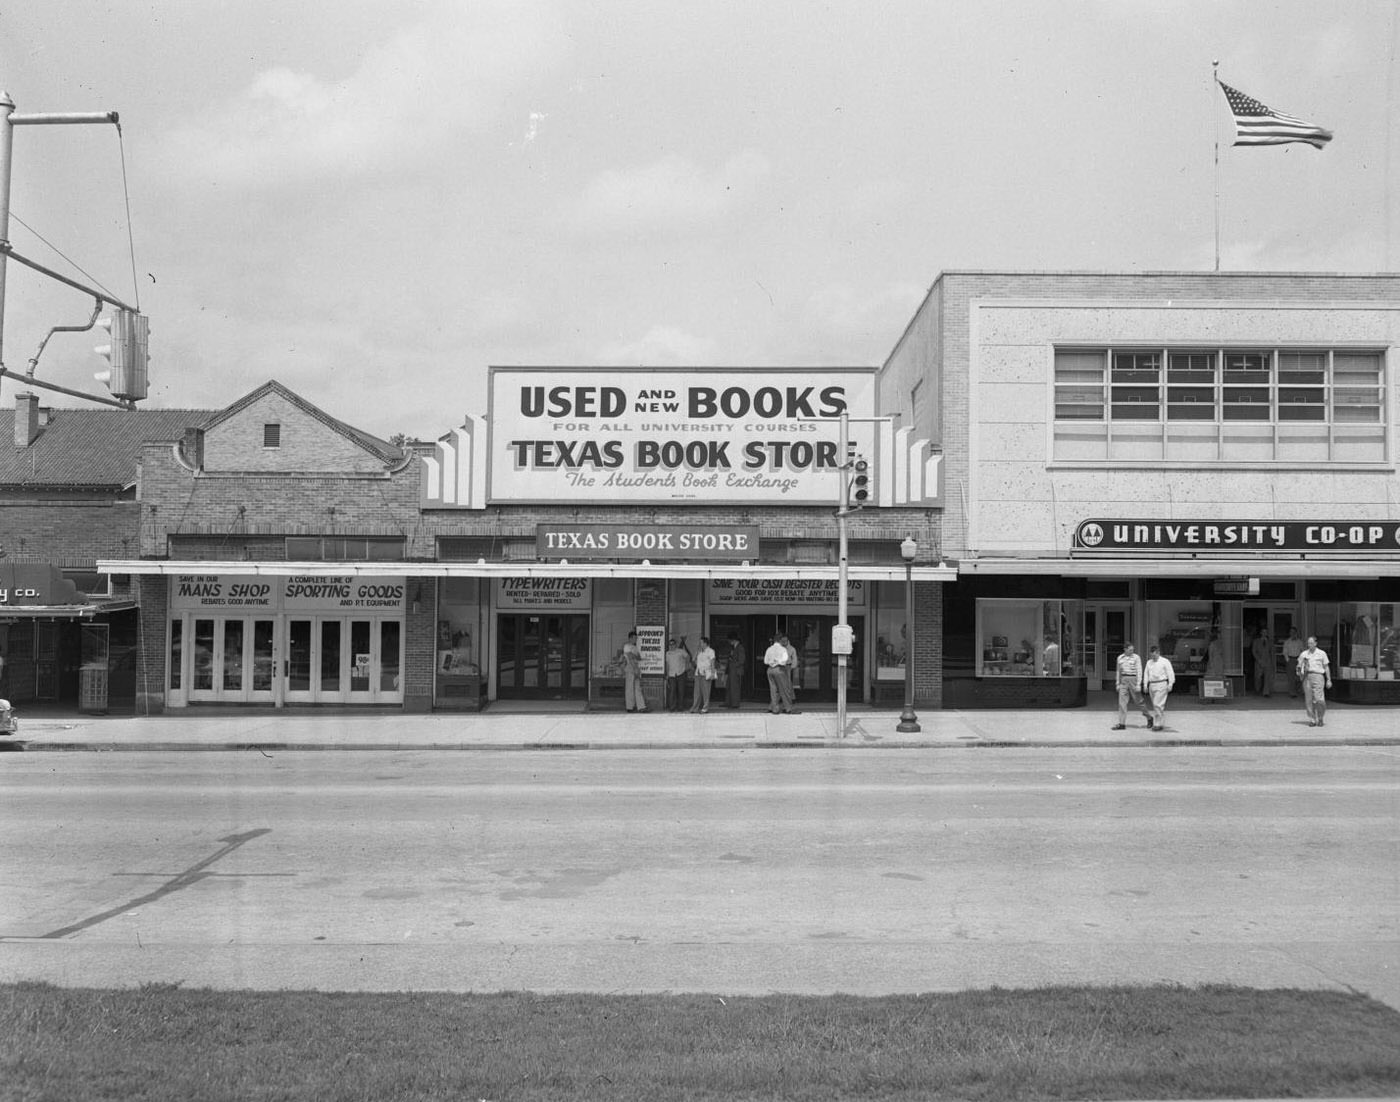 Texas Book Store and University Co-Op on Guadalupe Street, 1951.